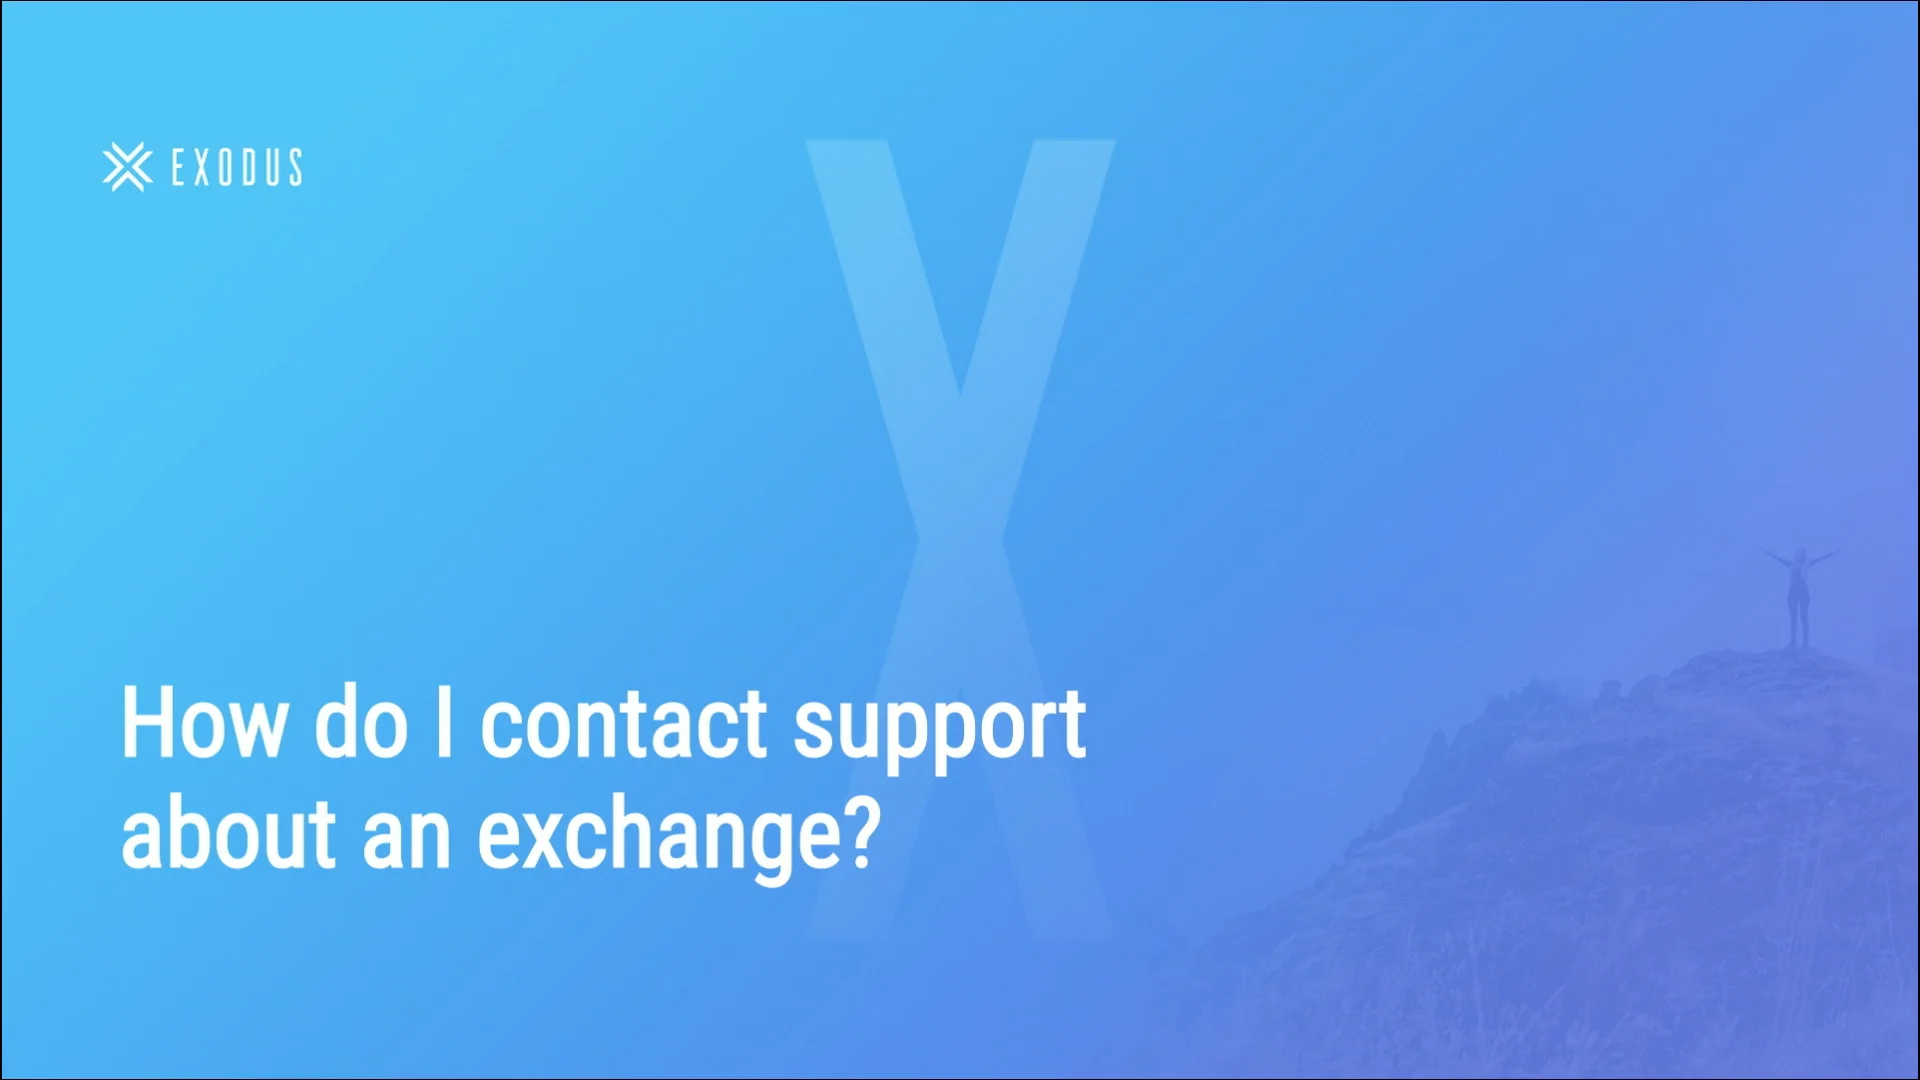 How do I contact support?